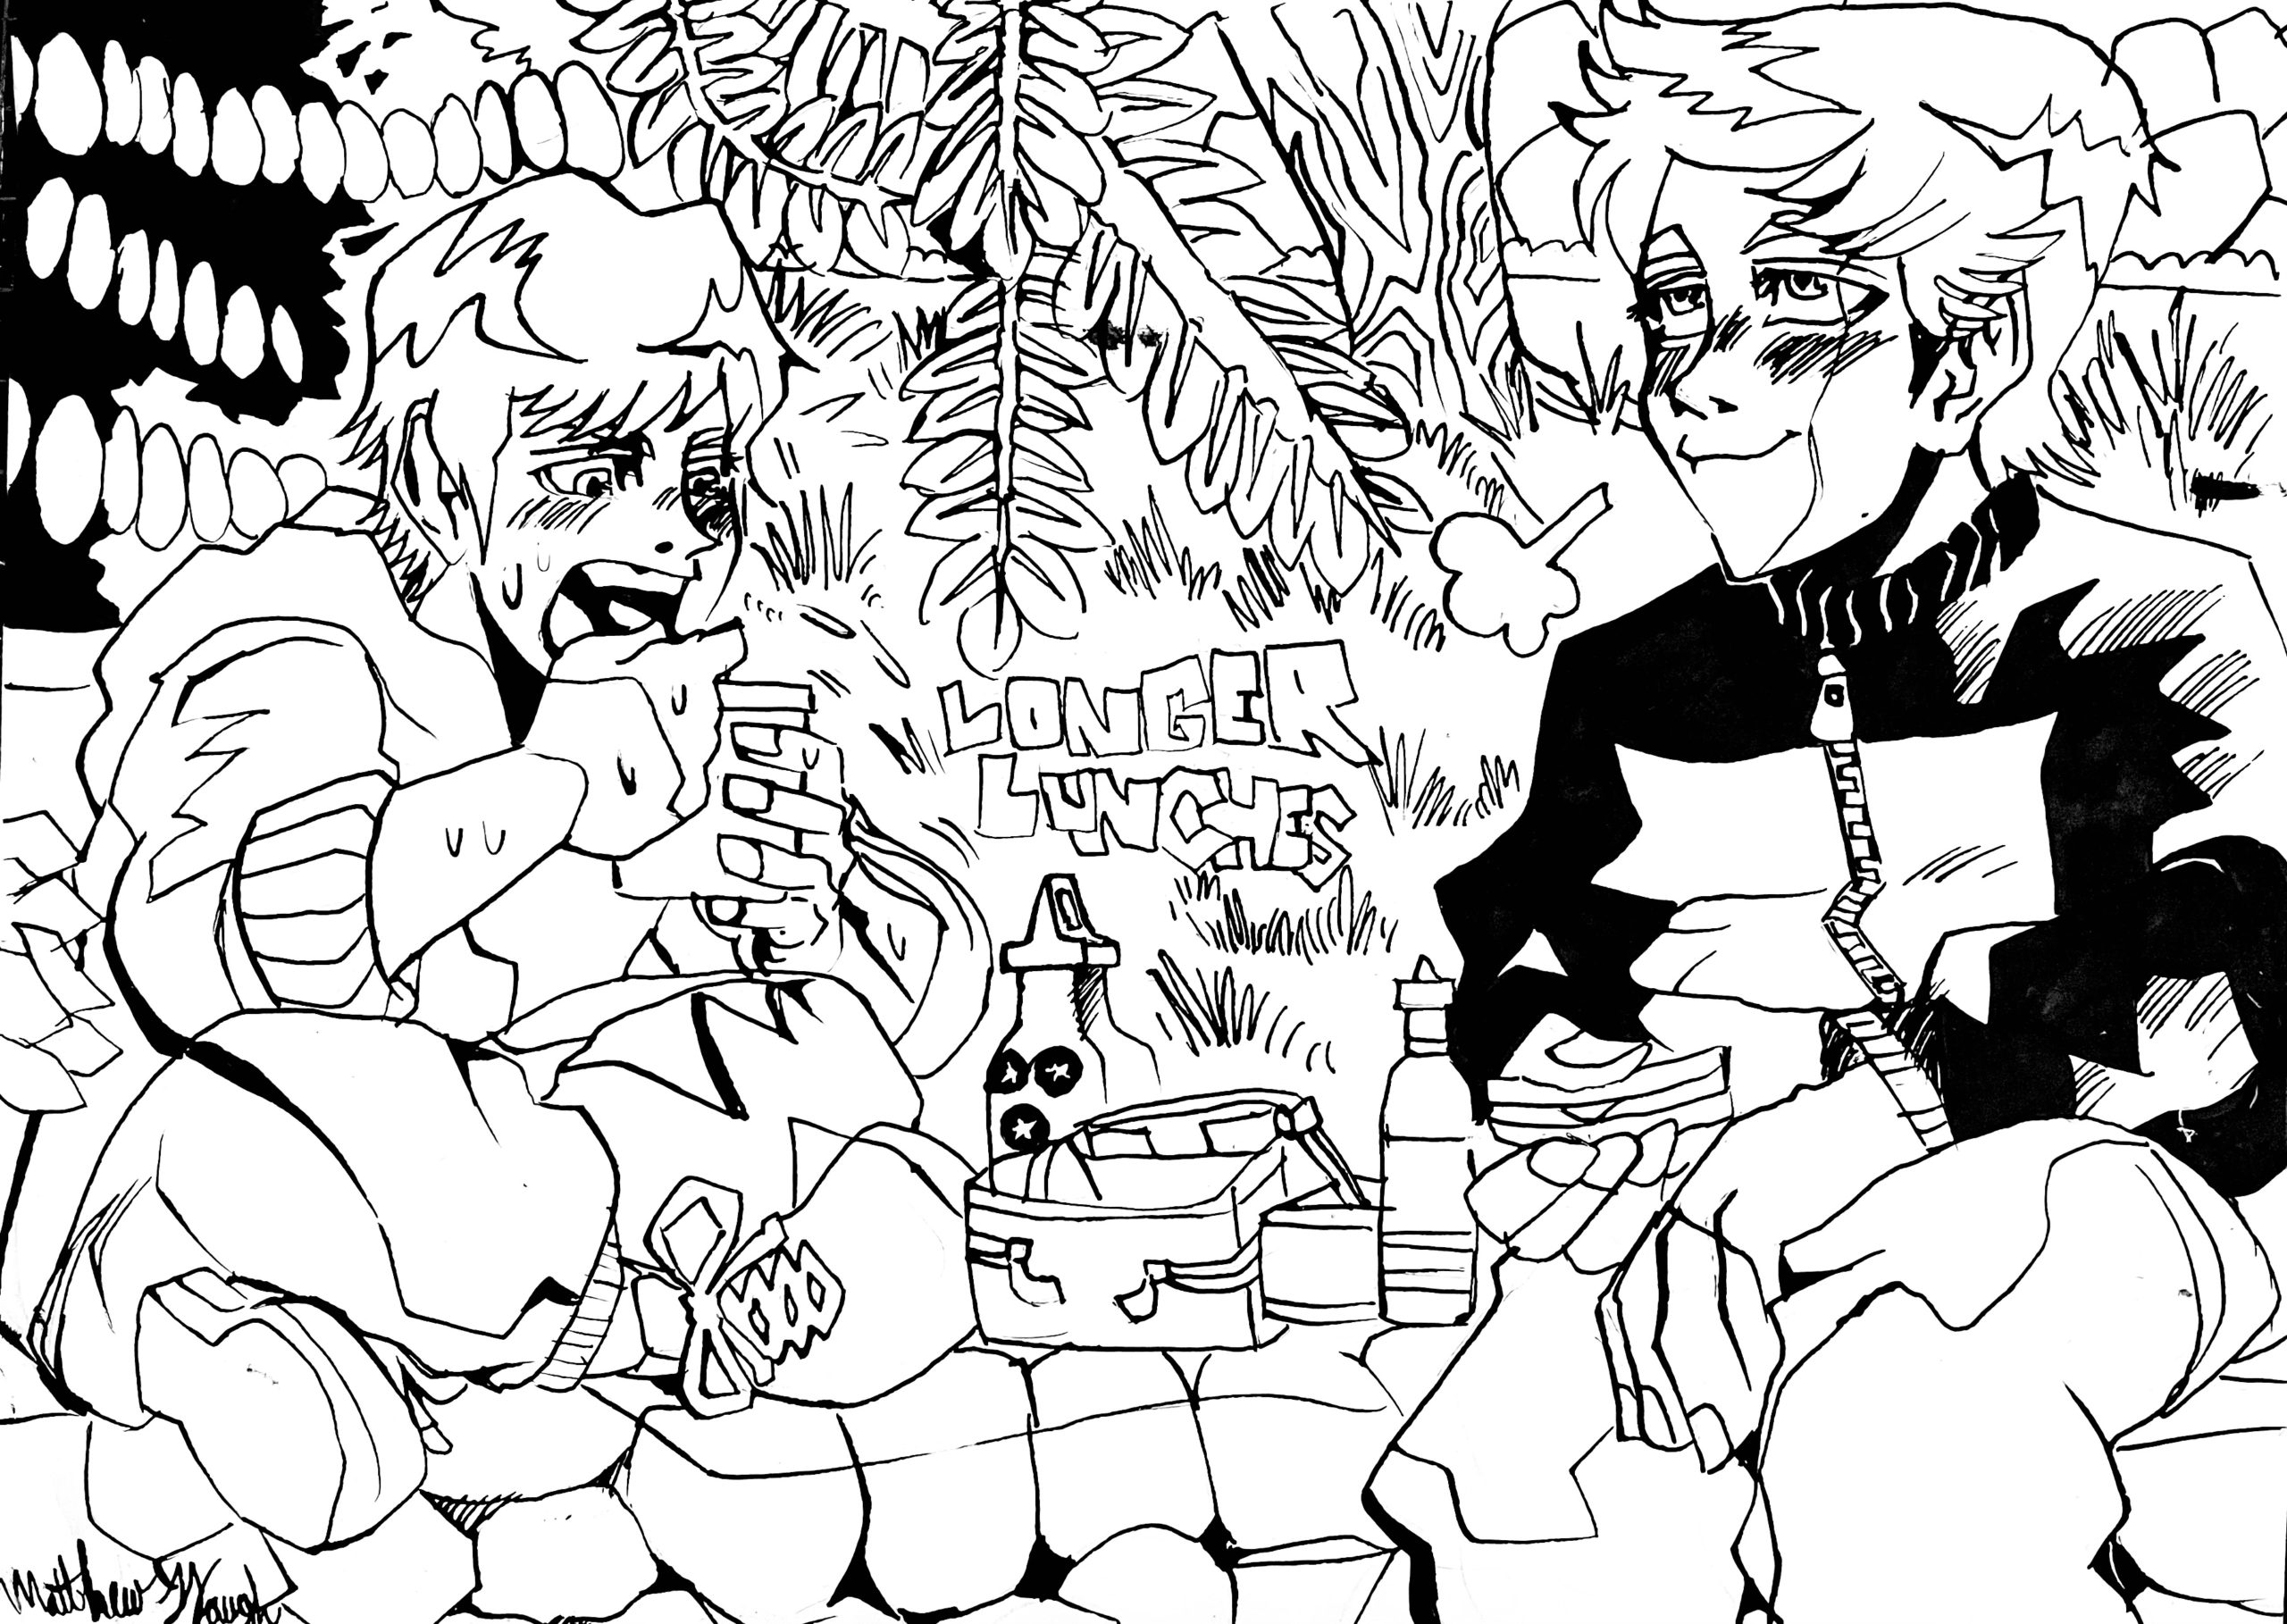 Animated drawing of two students eating lunch amidst a leafy backdrop, the text 'Longer Lunches' between them.